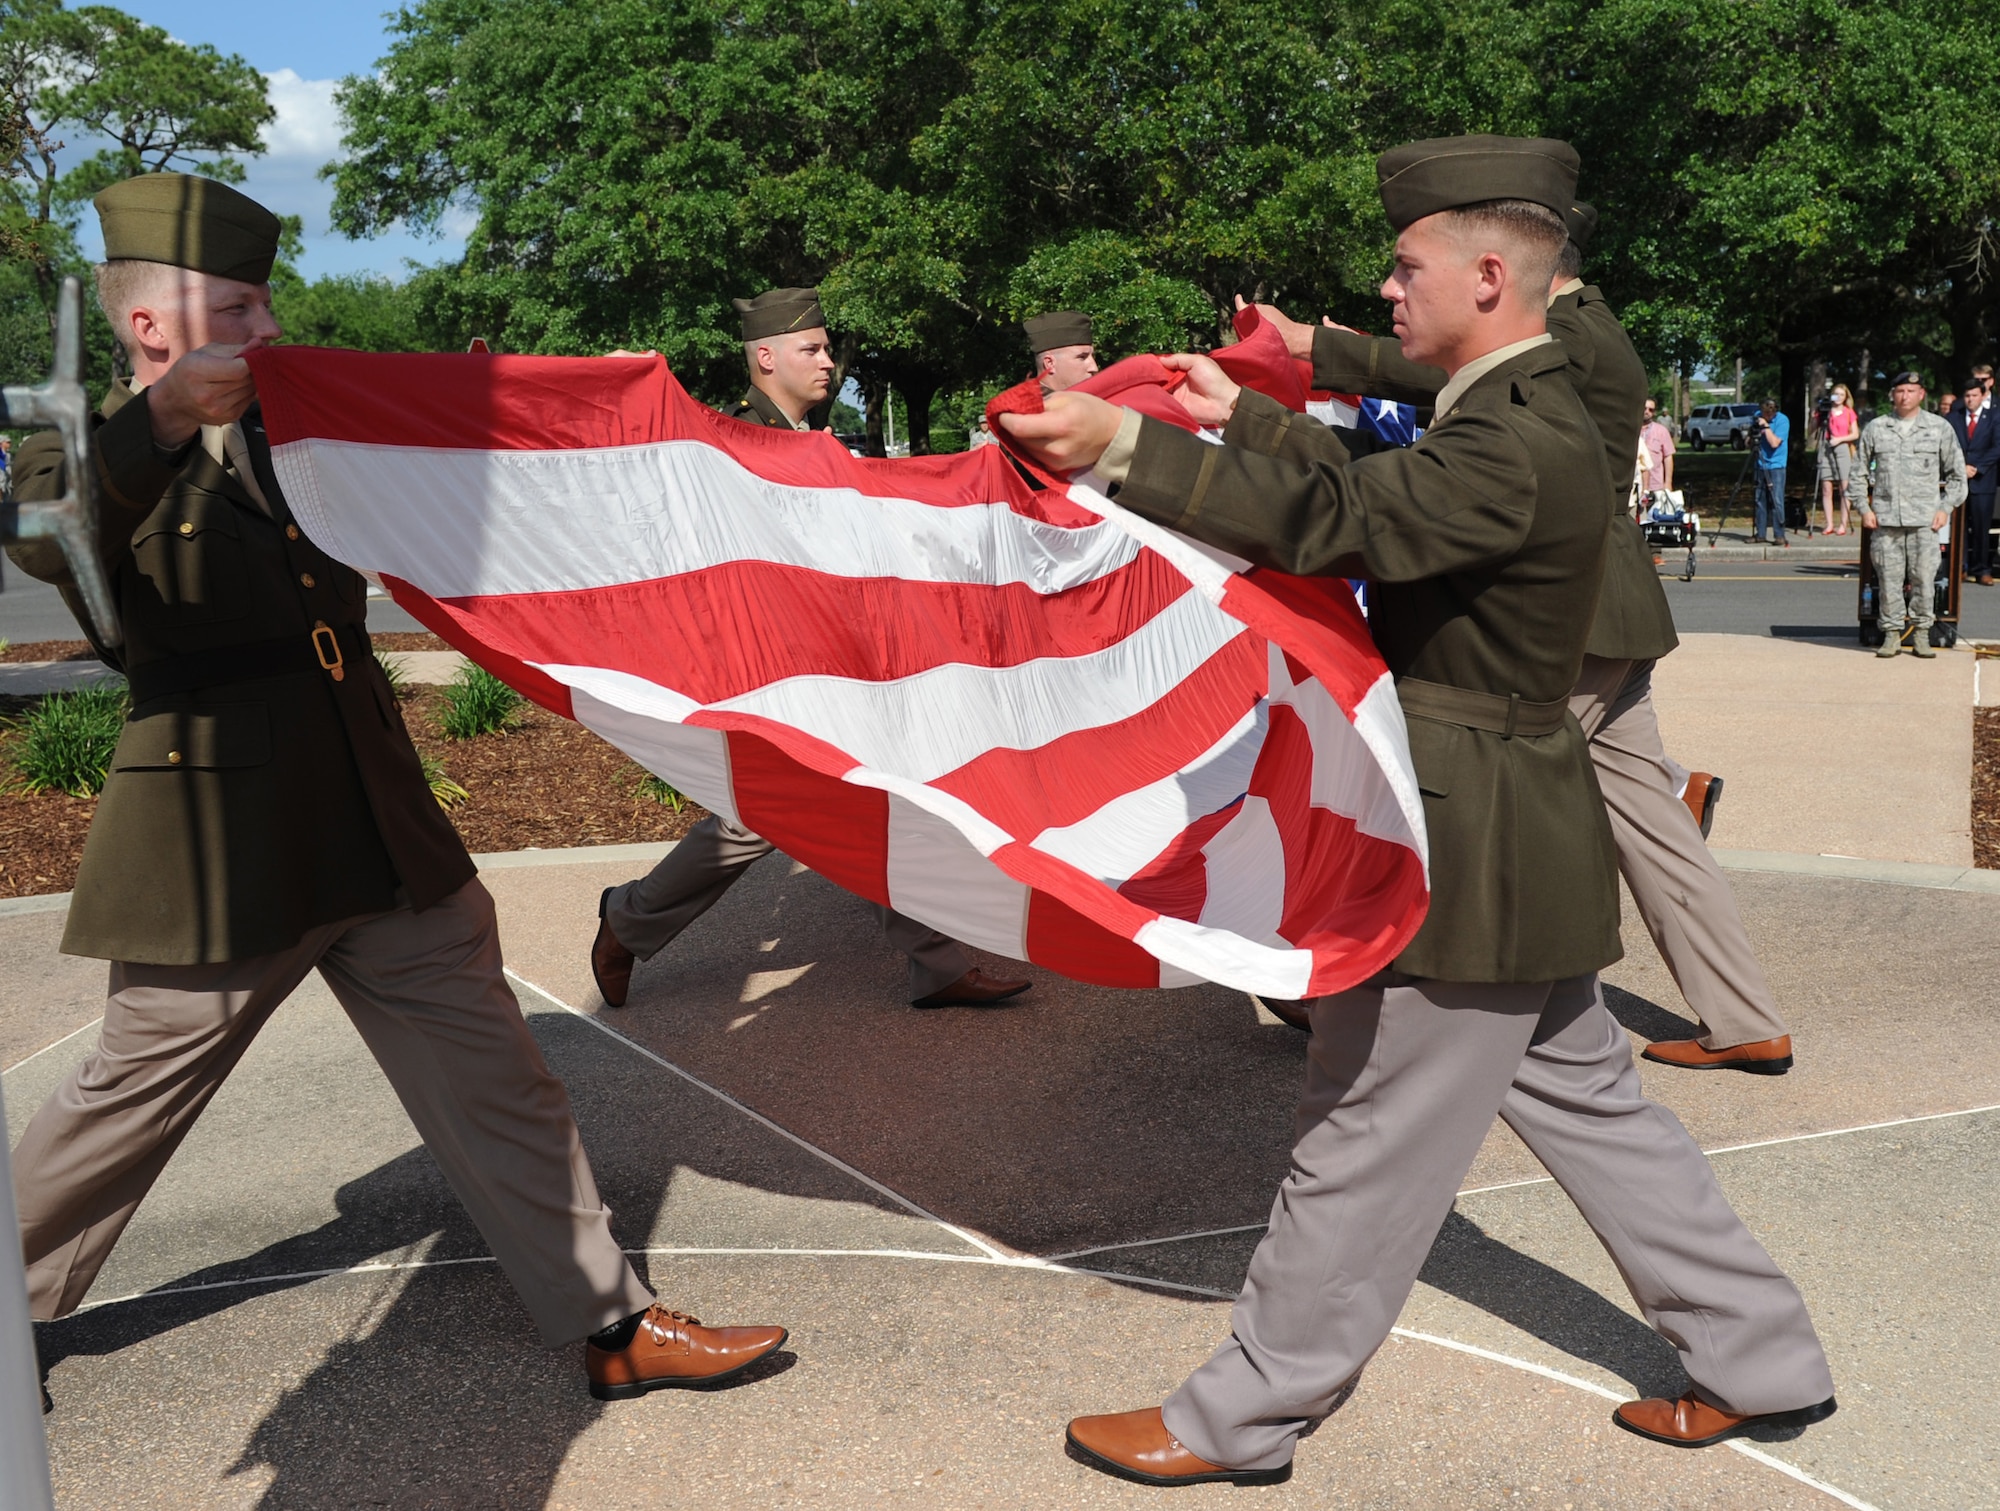 81st Security Forces Squadron Combat Arms Training and Maintenance members fold the U.S. flag during the Lt. Samuel Reeves Keesler, Jr. Memorial Retreat Ceremony May 13, 2016, Keesler Air Force Base, Miss. The event was held in honor of Lt. Keesler’s date of entry into the Army Air Service 99 years ago. The retreat ceremony is part of a year-long celebration of Lt. Keesler, a Mississippi native and WORLD WAR I hero, and the 75th anniversary of the opening of the base. (U.S. Air Force photo by Kemberly Groue)